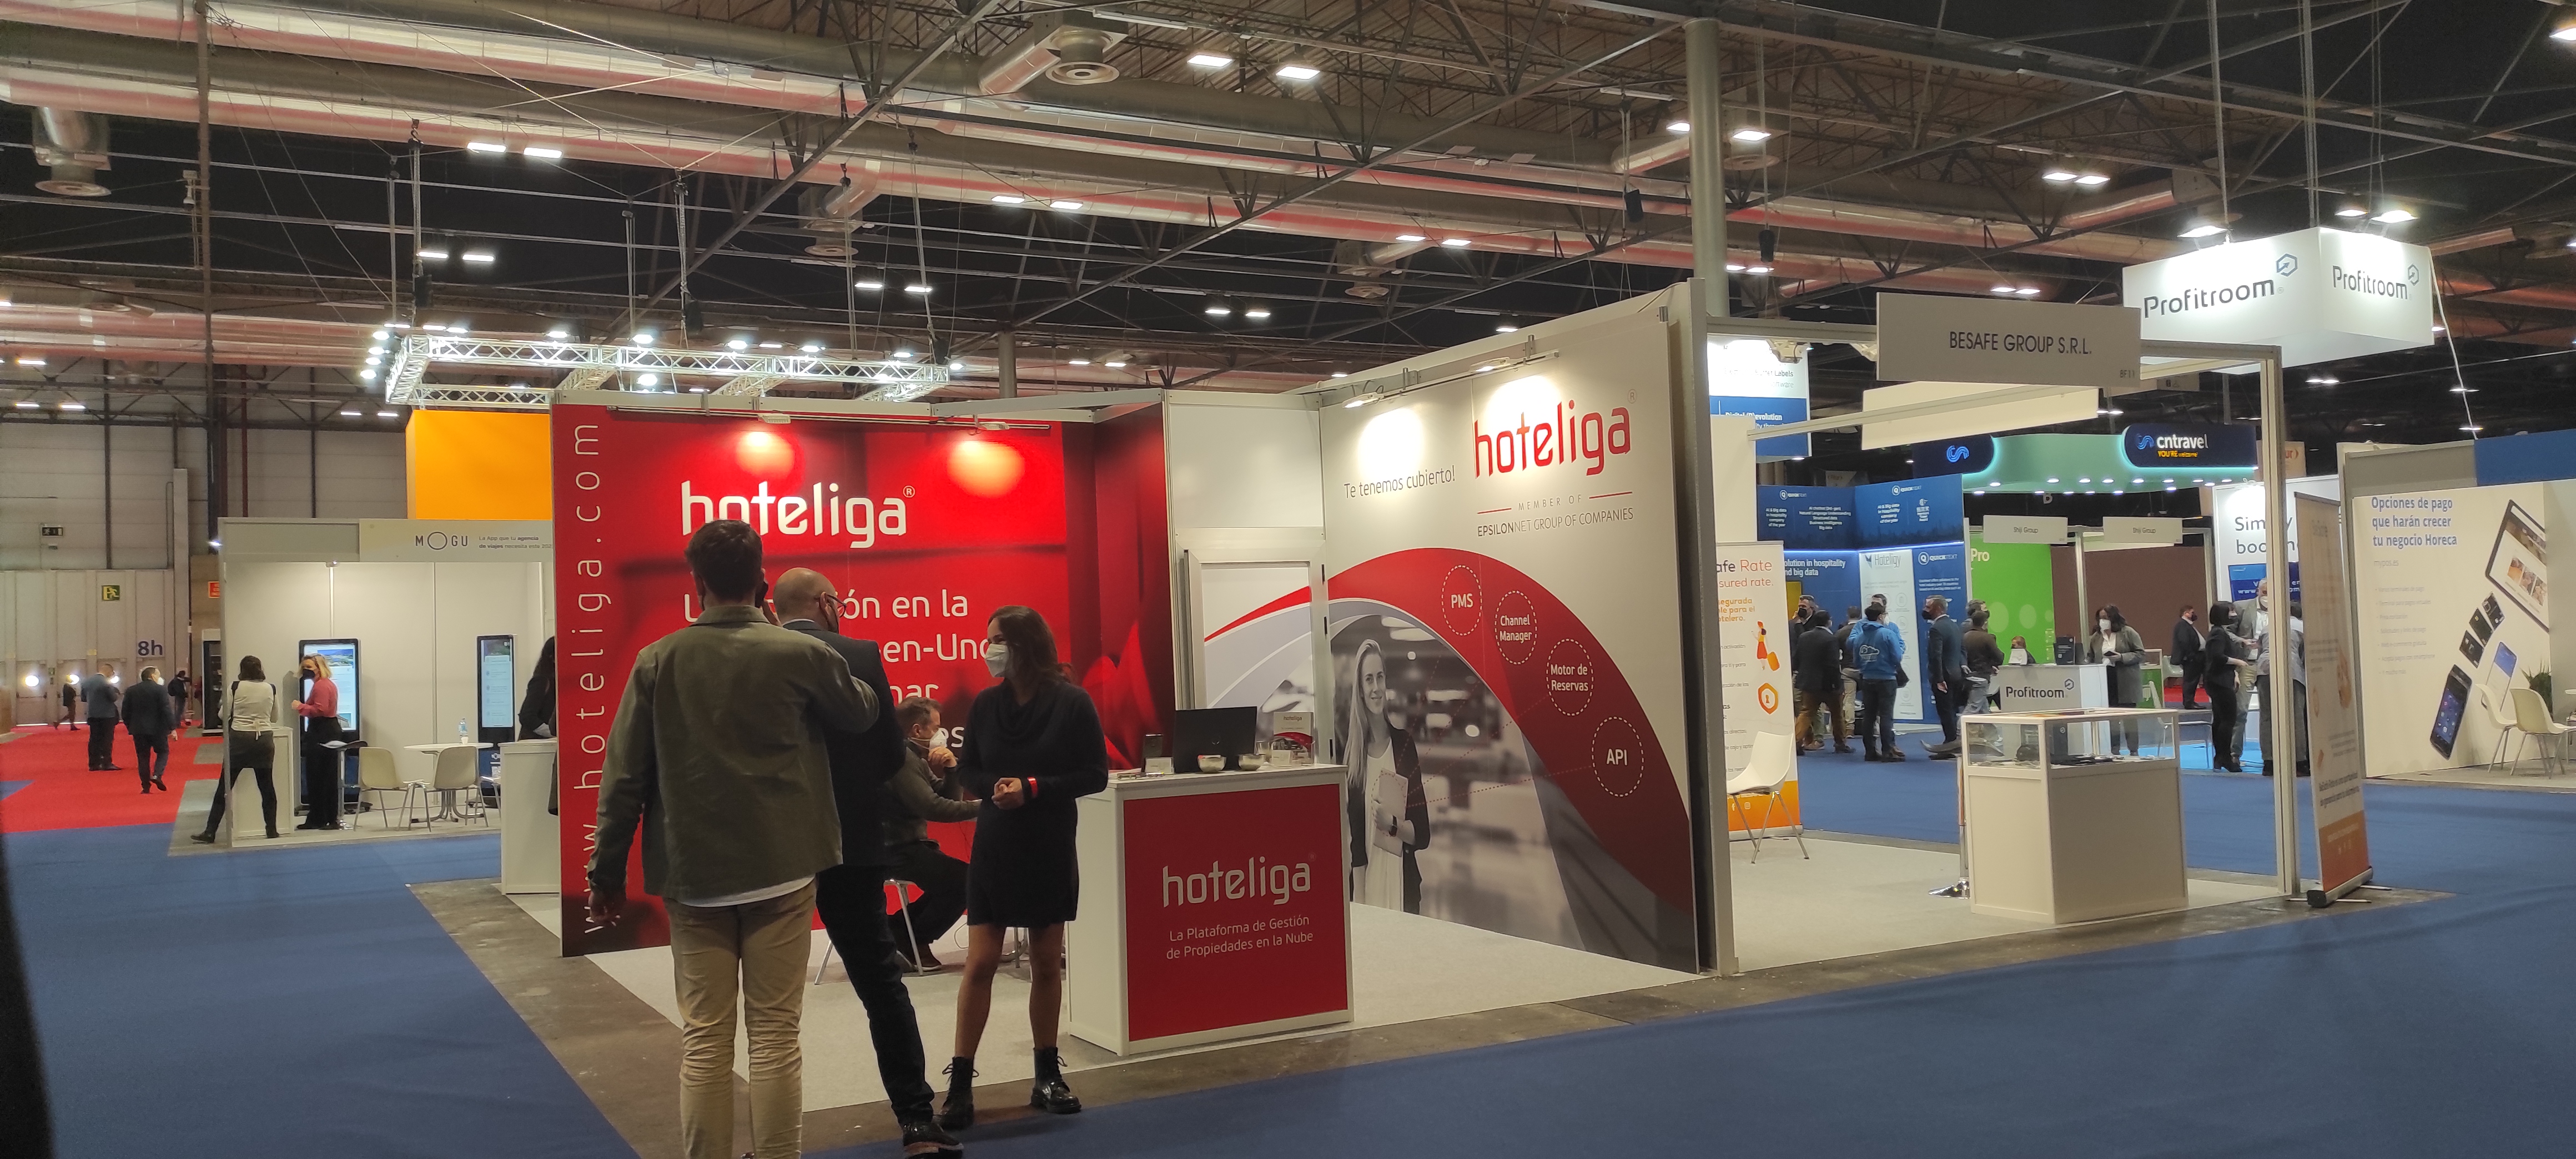 Another year completed for hoteliga in the FITUR international exhibition